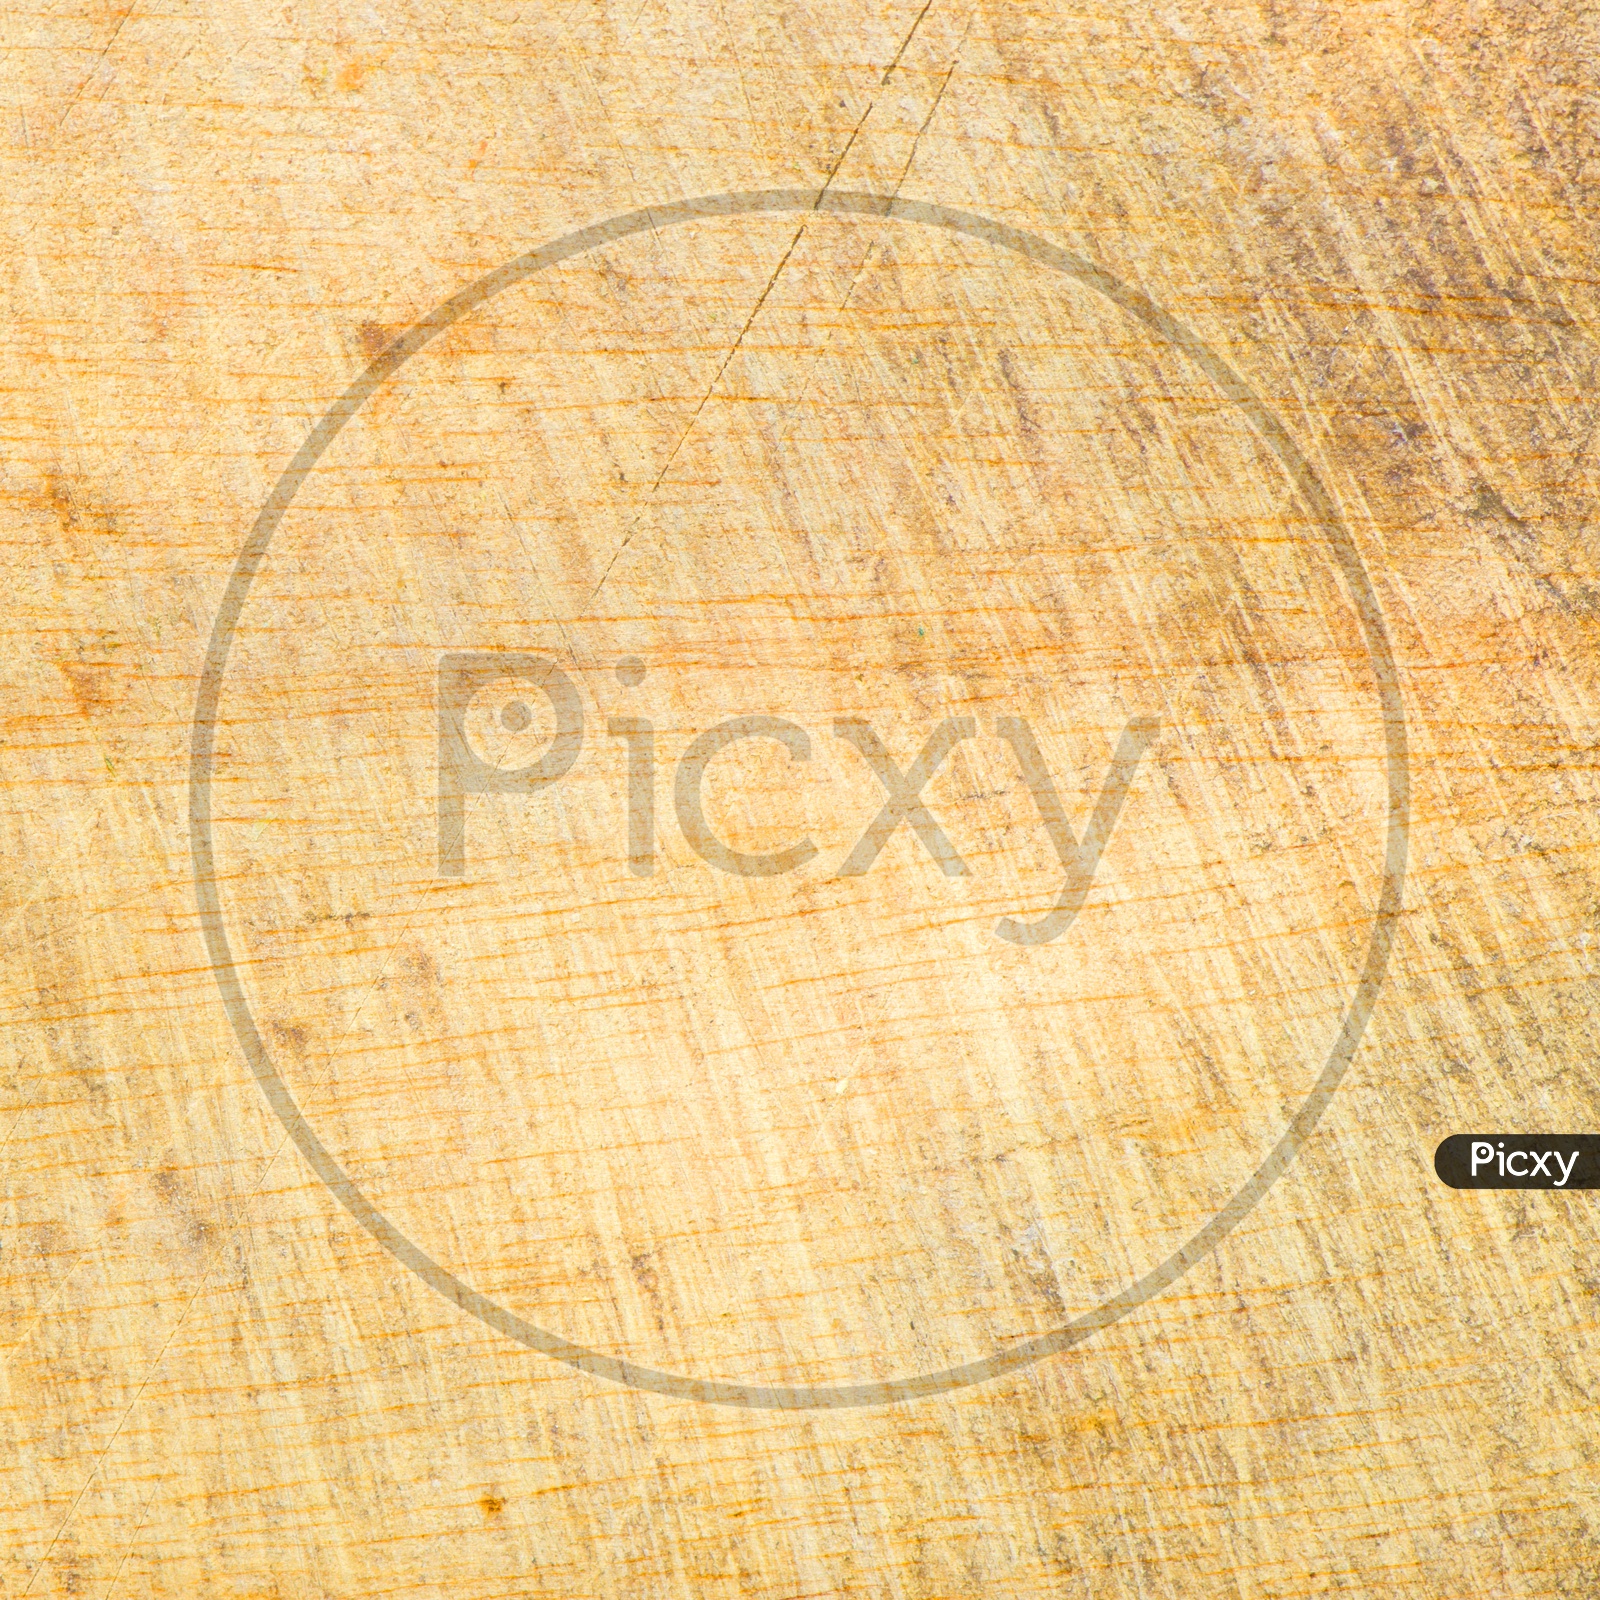 Abstract texture Background With Old Wooden Surfaces